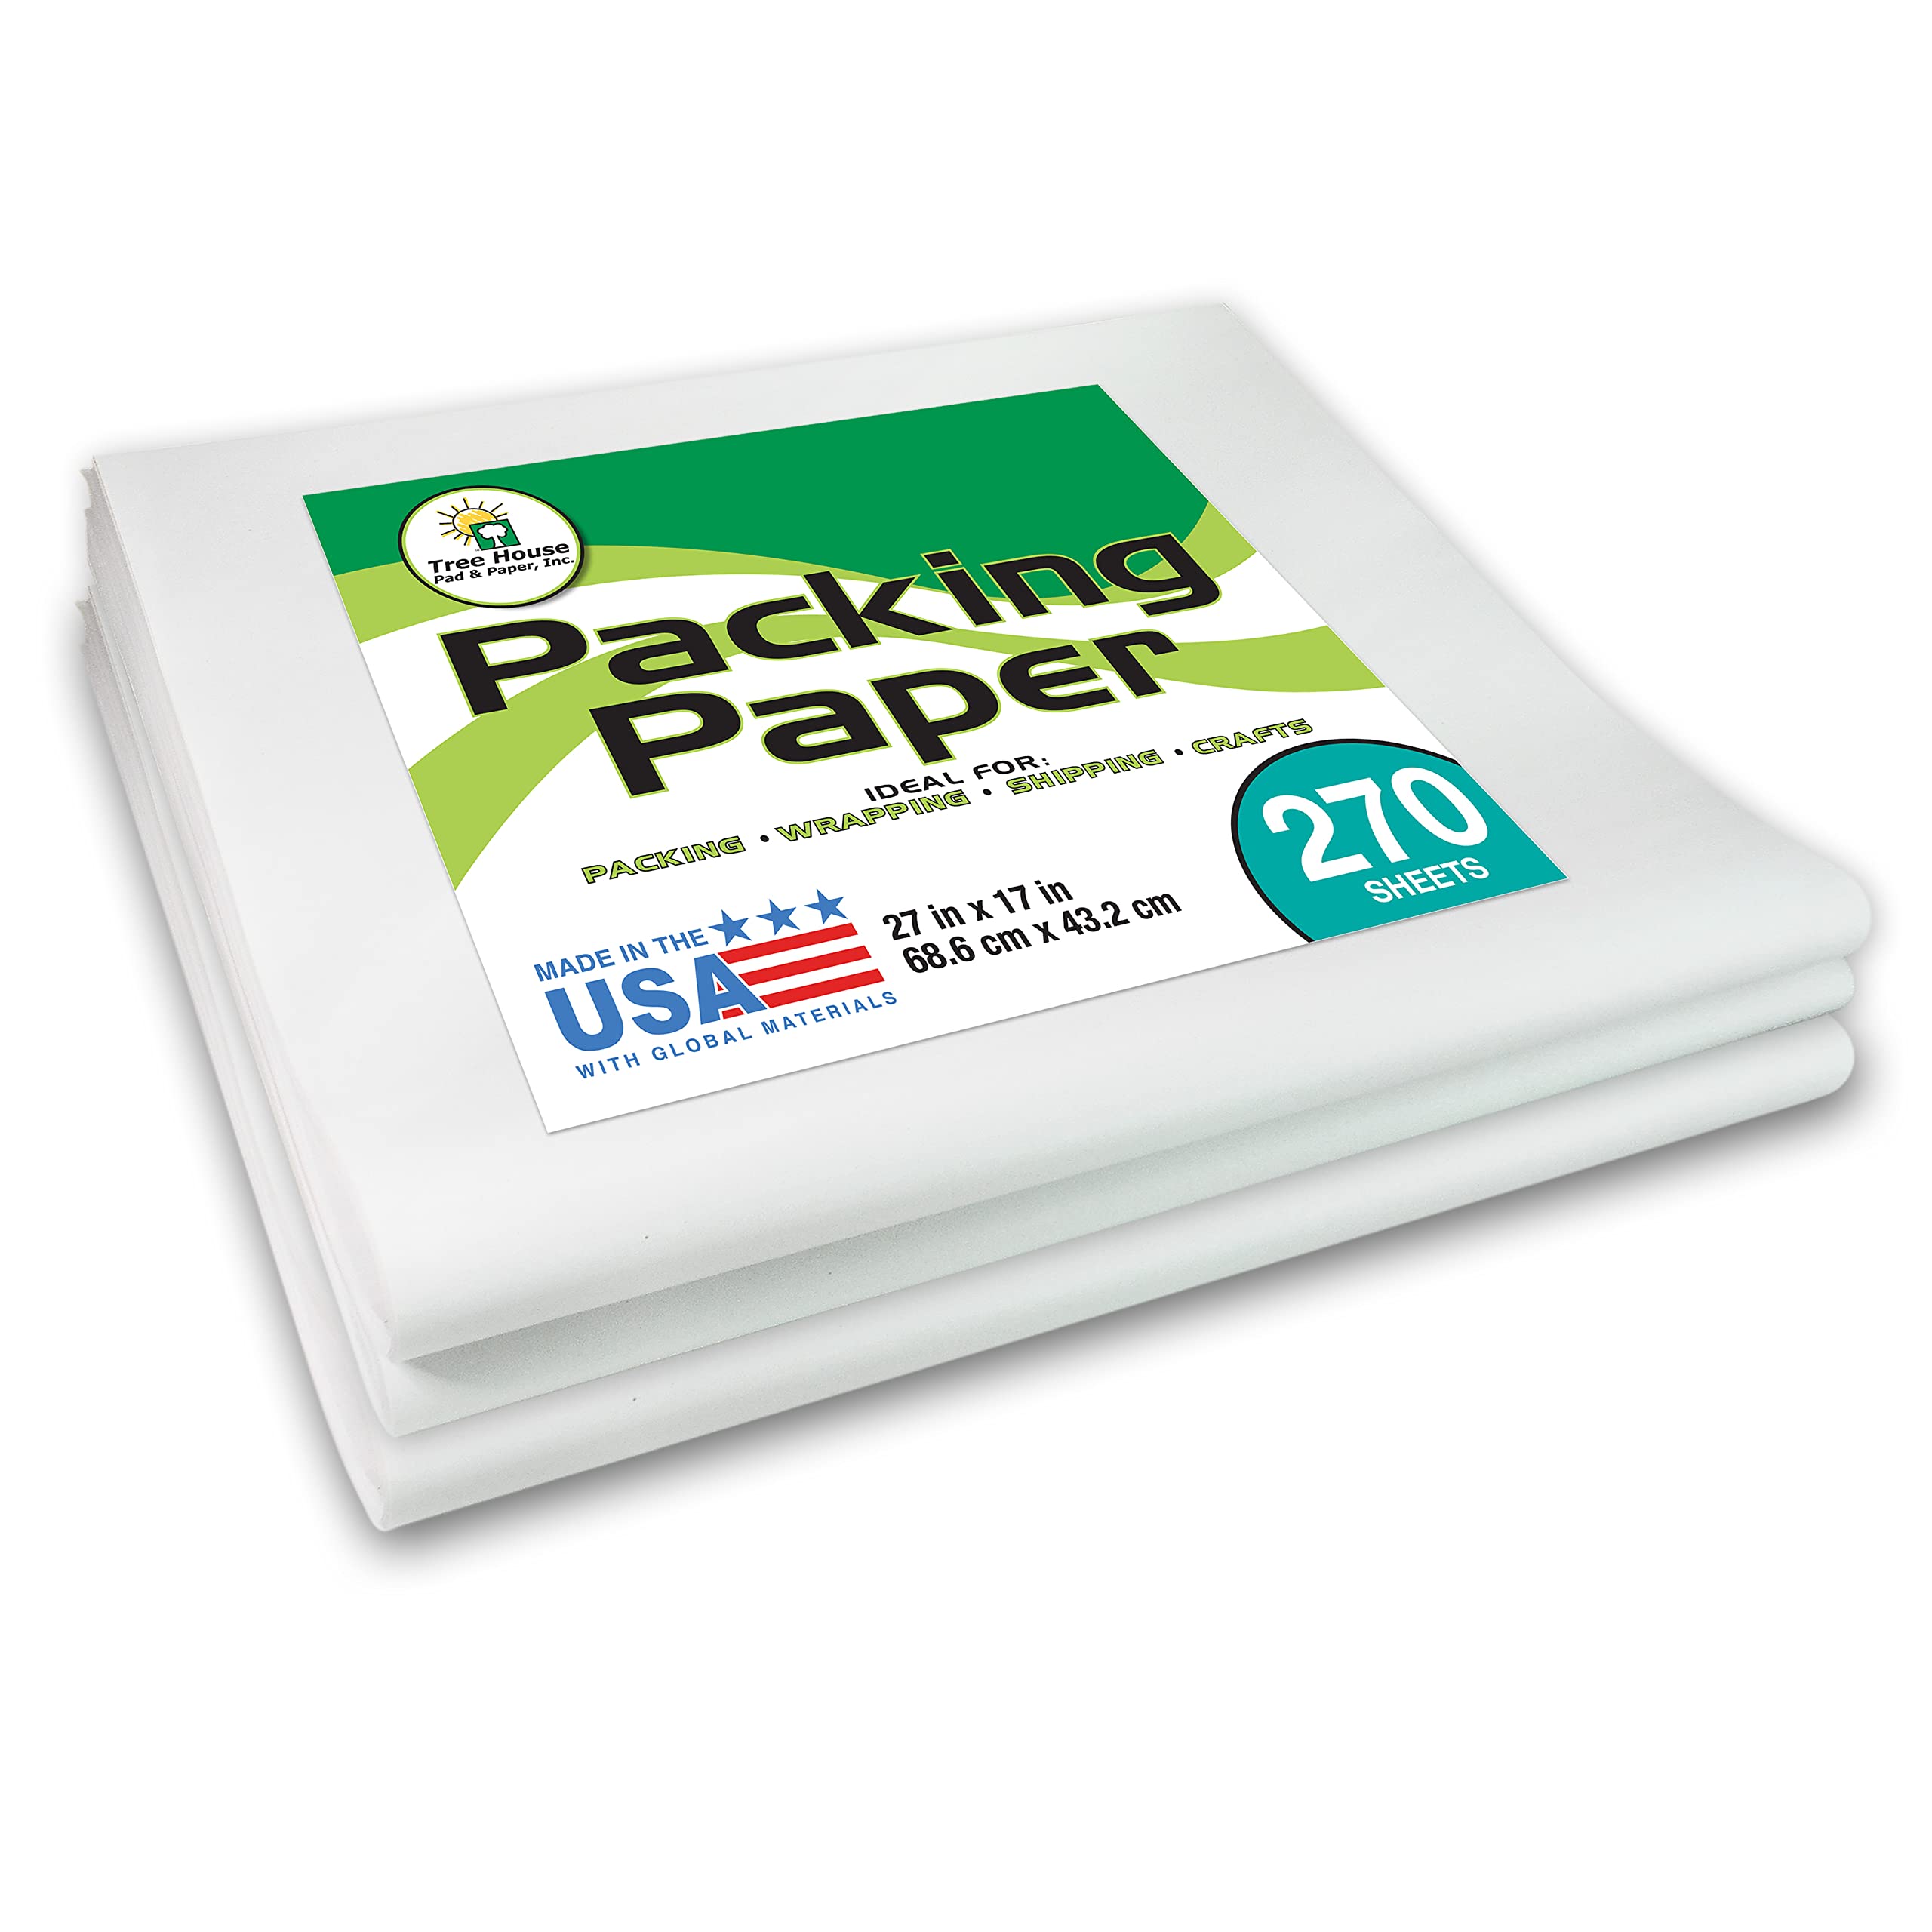 Packing Paper Newsprint Sheets for Moving & Shipping, 270 Sheets, 27x17,  Made in The USA